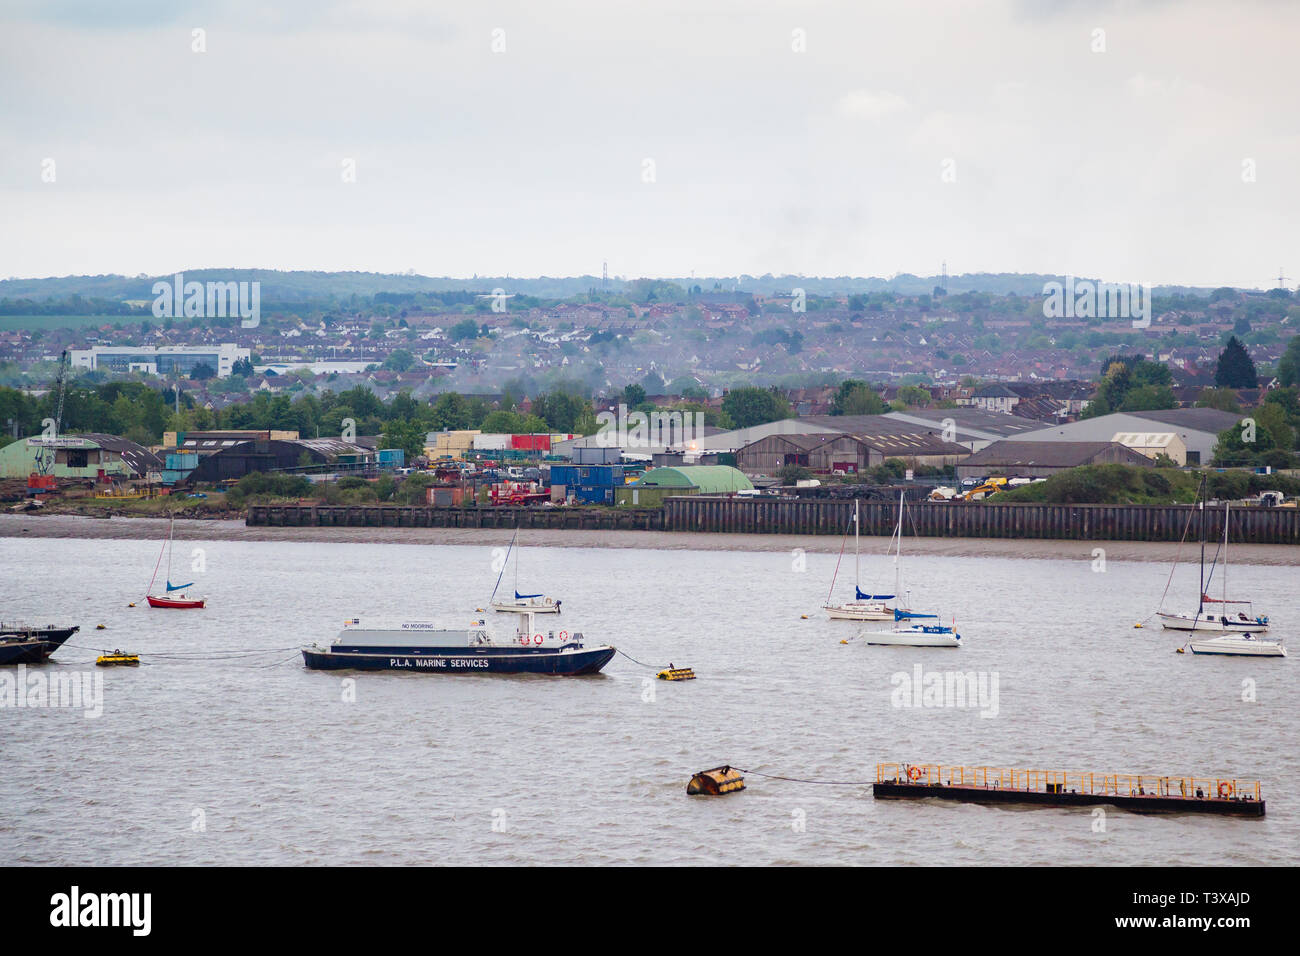 Gravesend, Kent, UK. A view from the river Thames looking over the industrial  area of East Gravesend. Boats and other marine shipping can be seen. Stock Photo